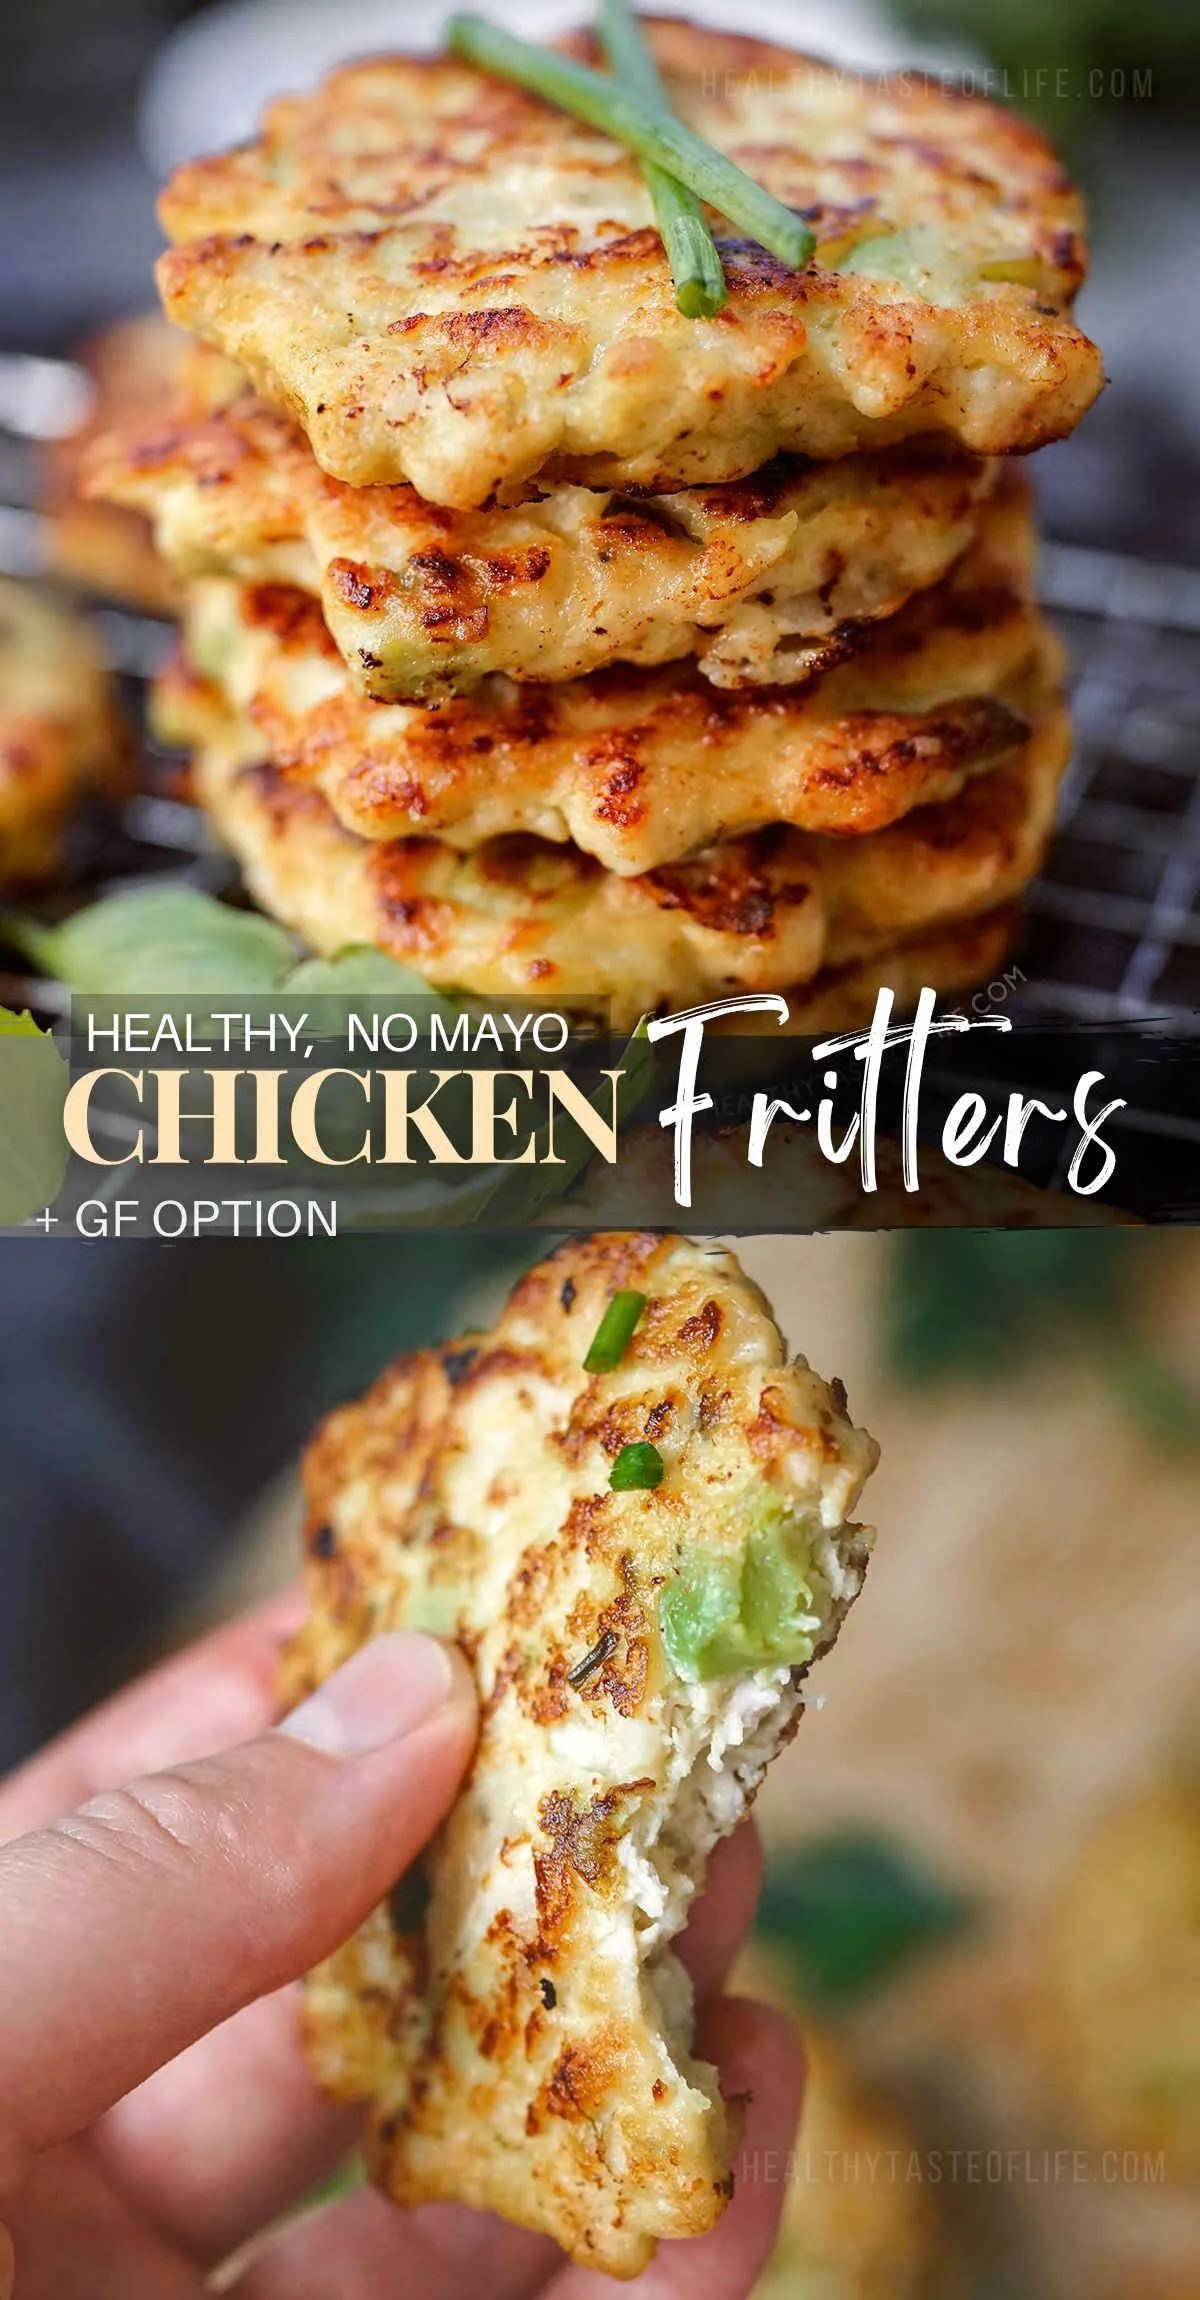 These healthy chicken fritters feature fresh chicken breast meat coated with seasoned flour, eggs and a honey mustard sauce, then pan fried (or baked) - yielding a crispy exterior and juicy interior. They can also be called chicken pancakes, patties or cakes and can be customized to your liking, by adding other ingredients like cheese and other seasonings. Easily make them gluten free as well. #chickenfritters #chickenpatties #chickencakes #friedchicken #easy #healthy #recipe #glutenfree